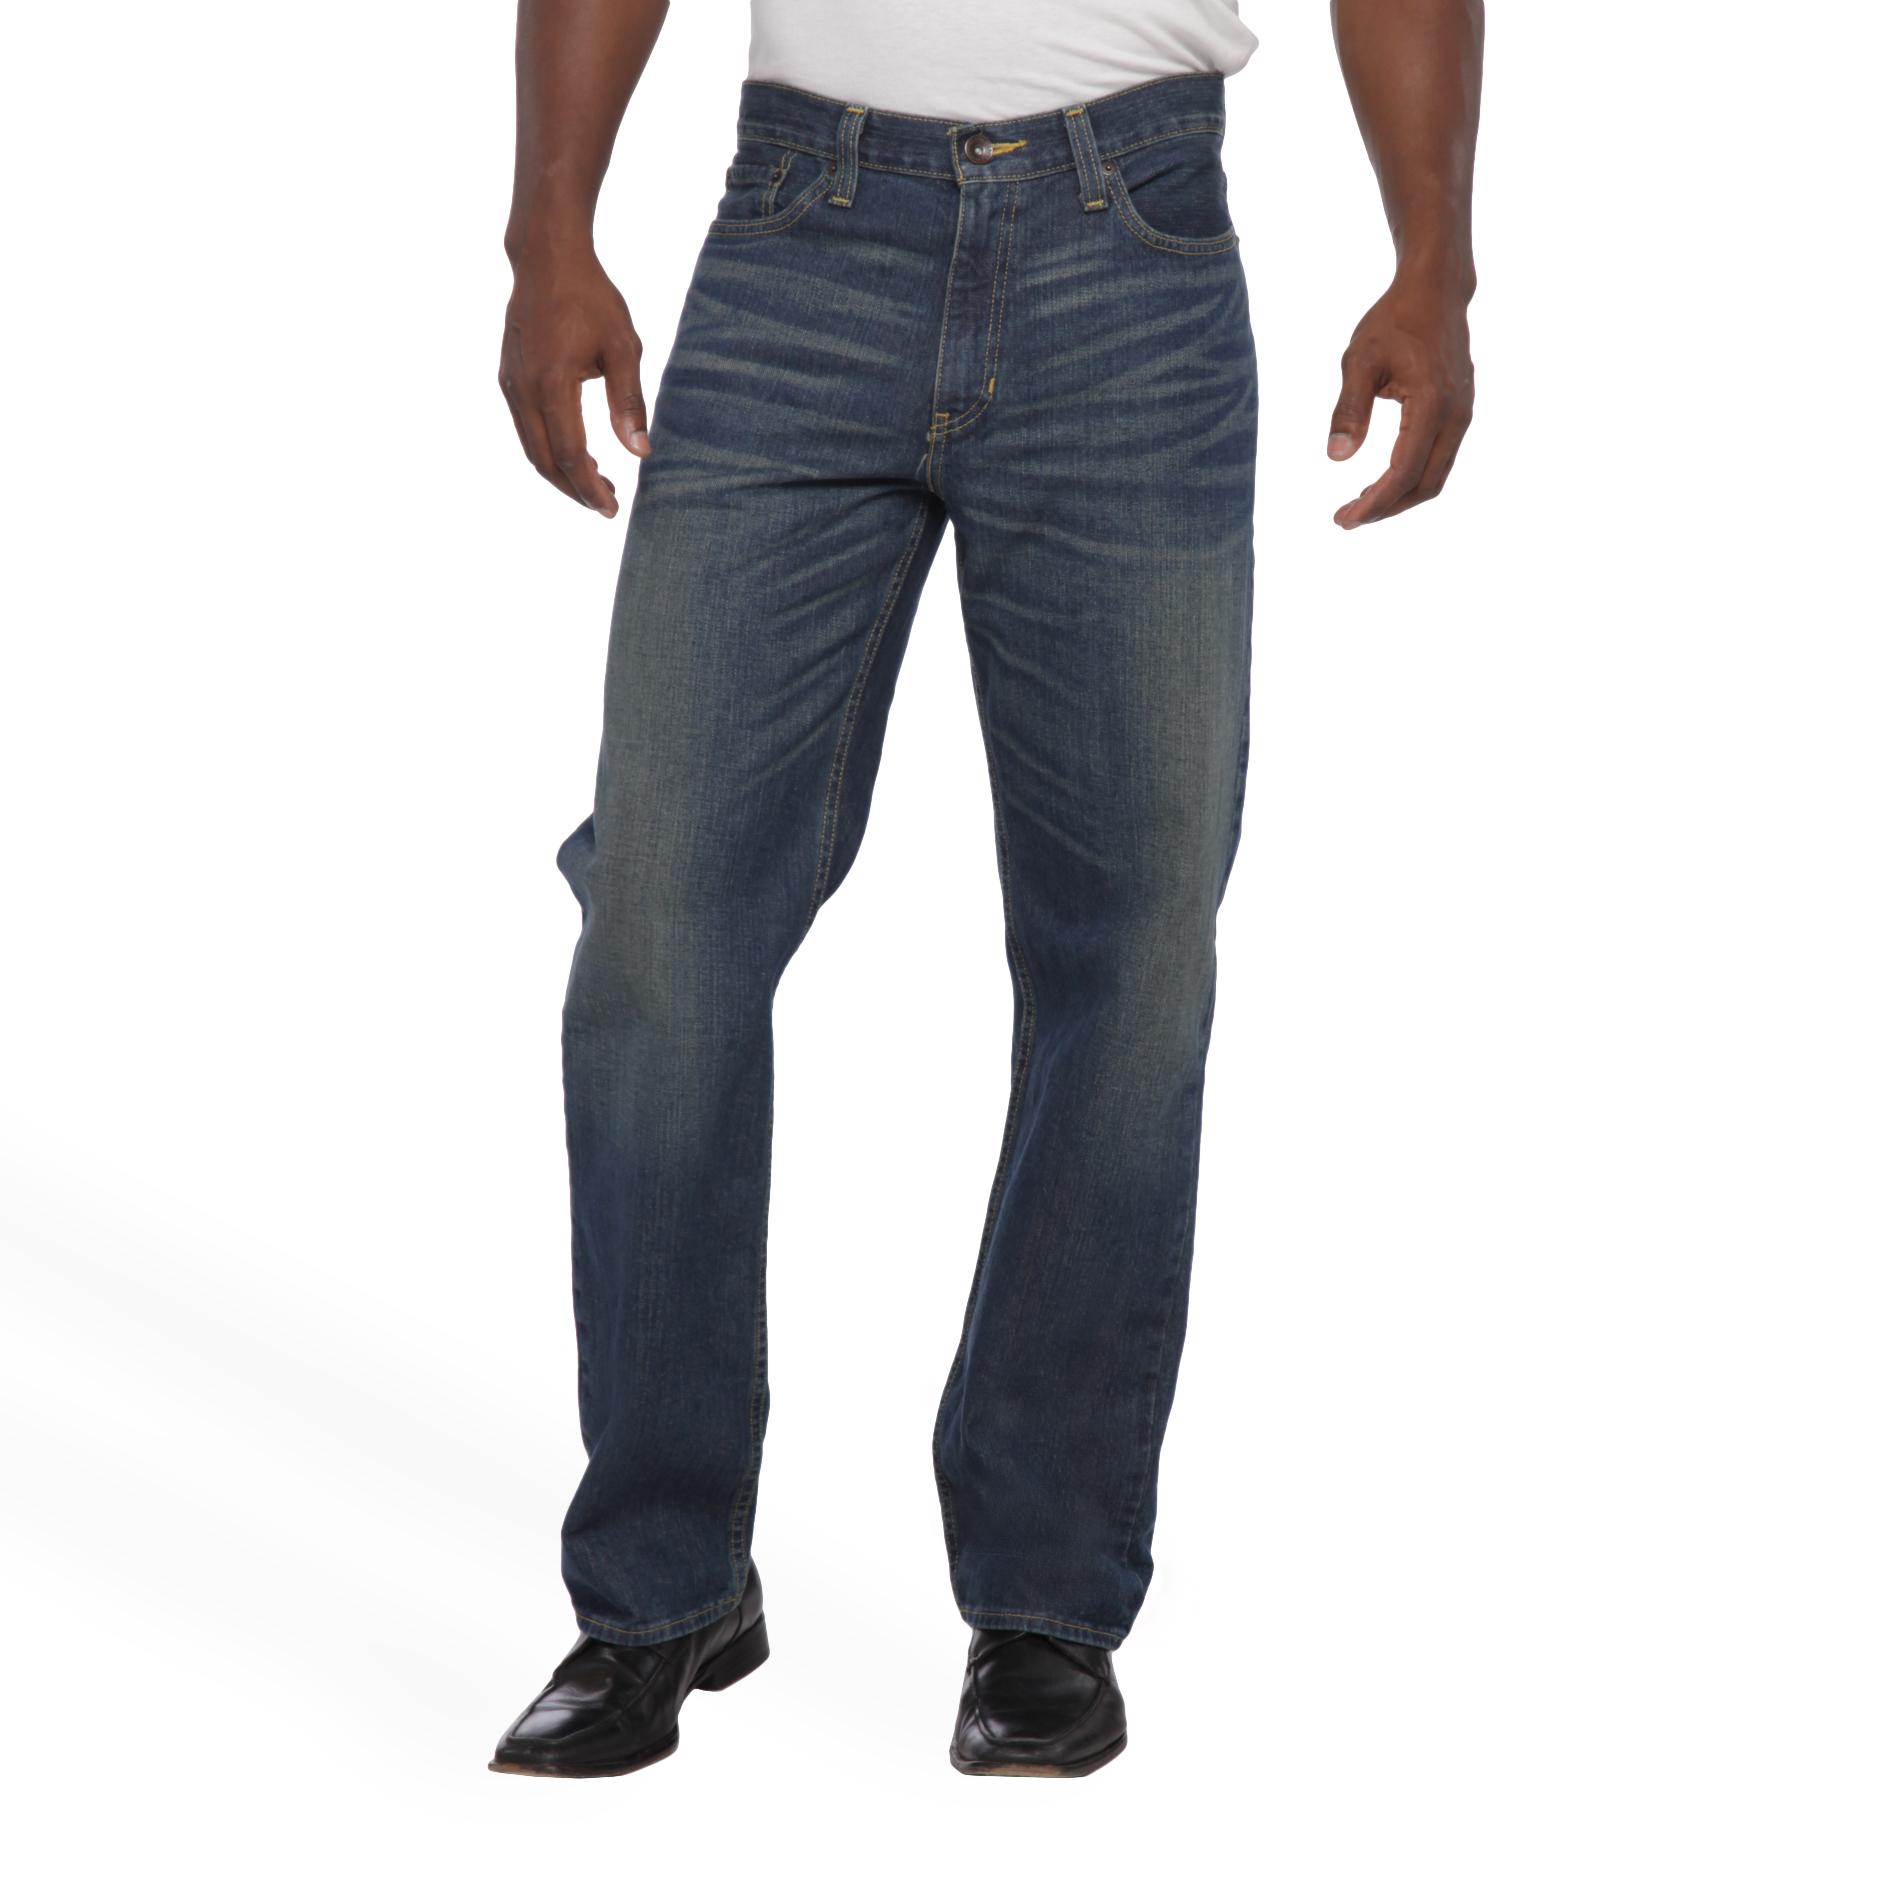 Roebuck & Co. Young Men's Relaxed Fit Straight Leg Jeans